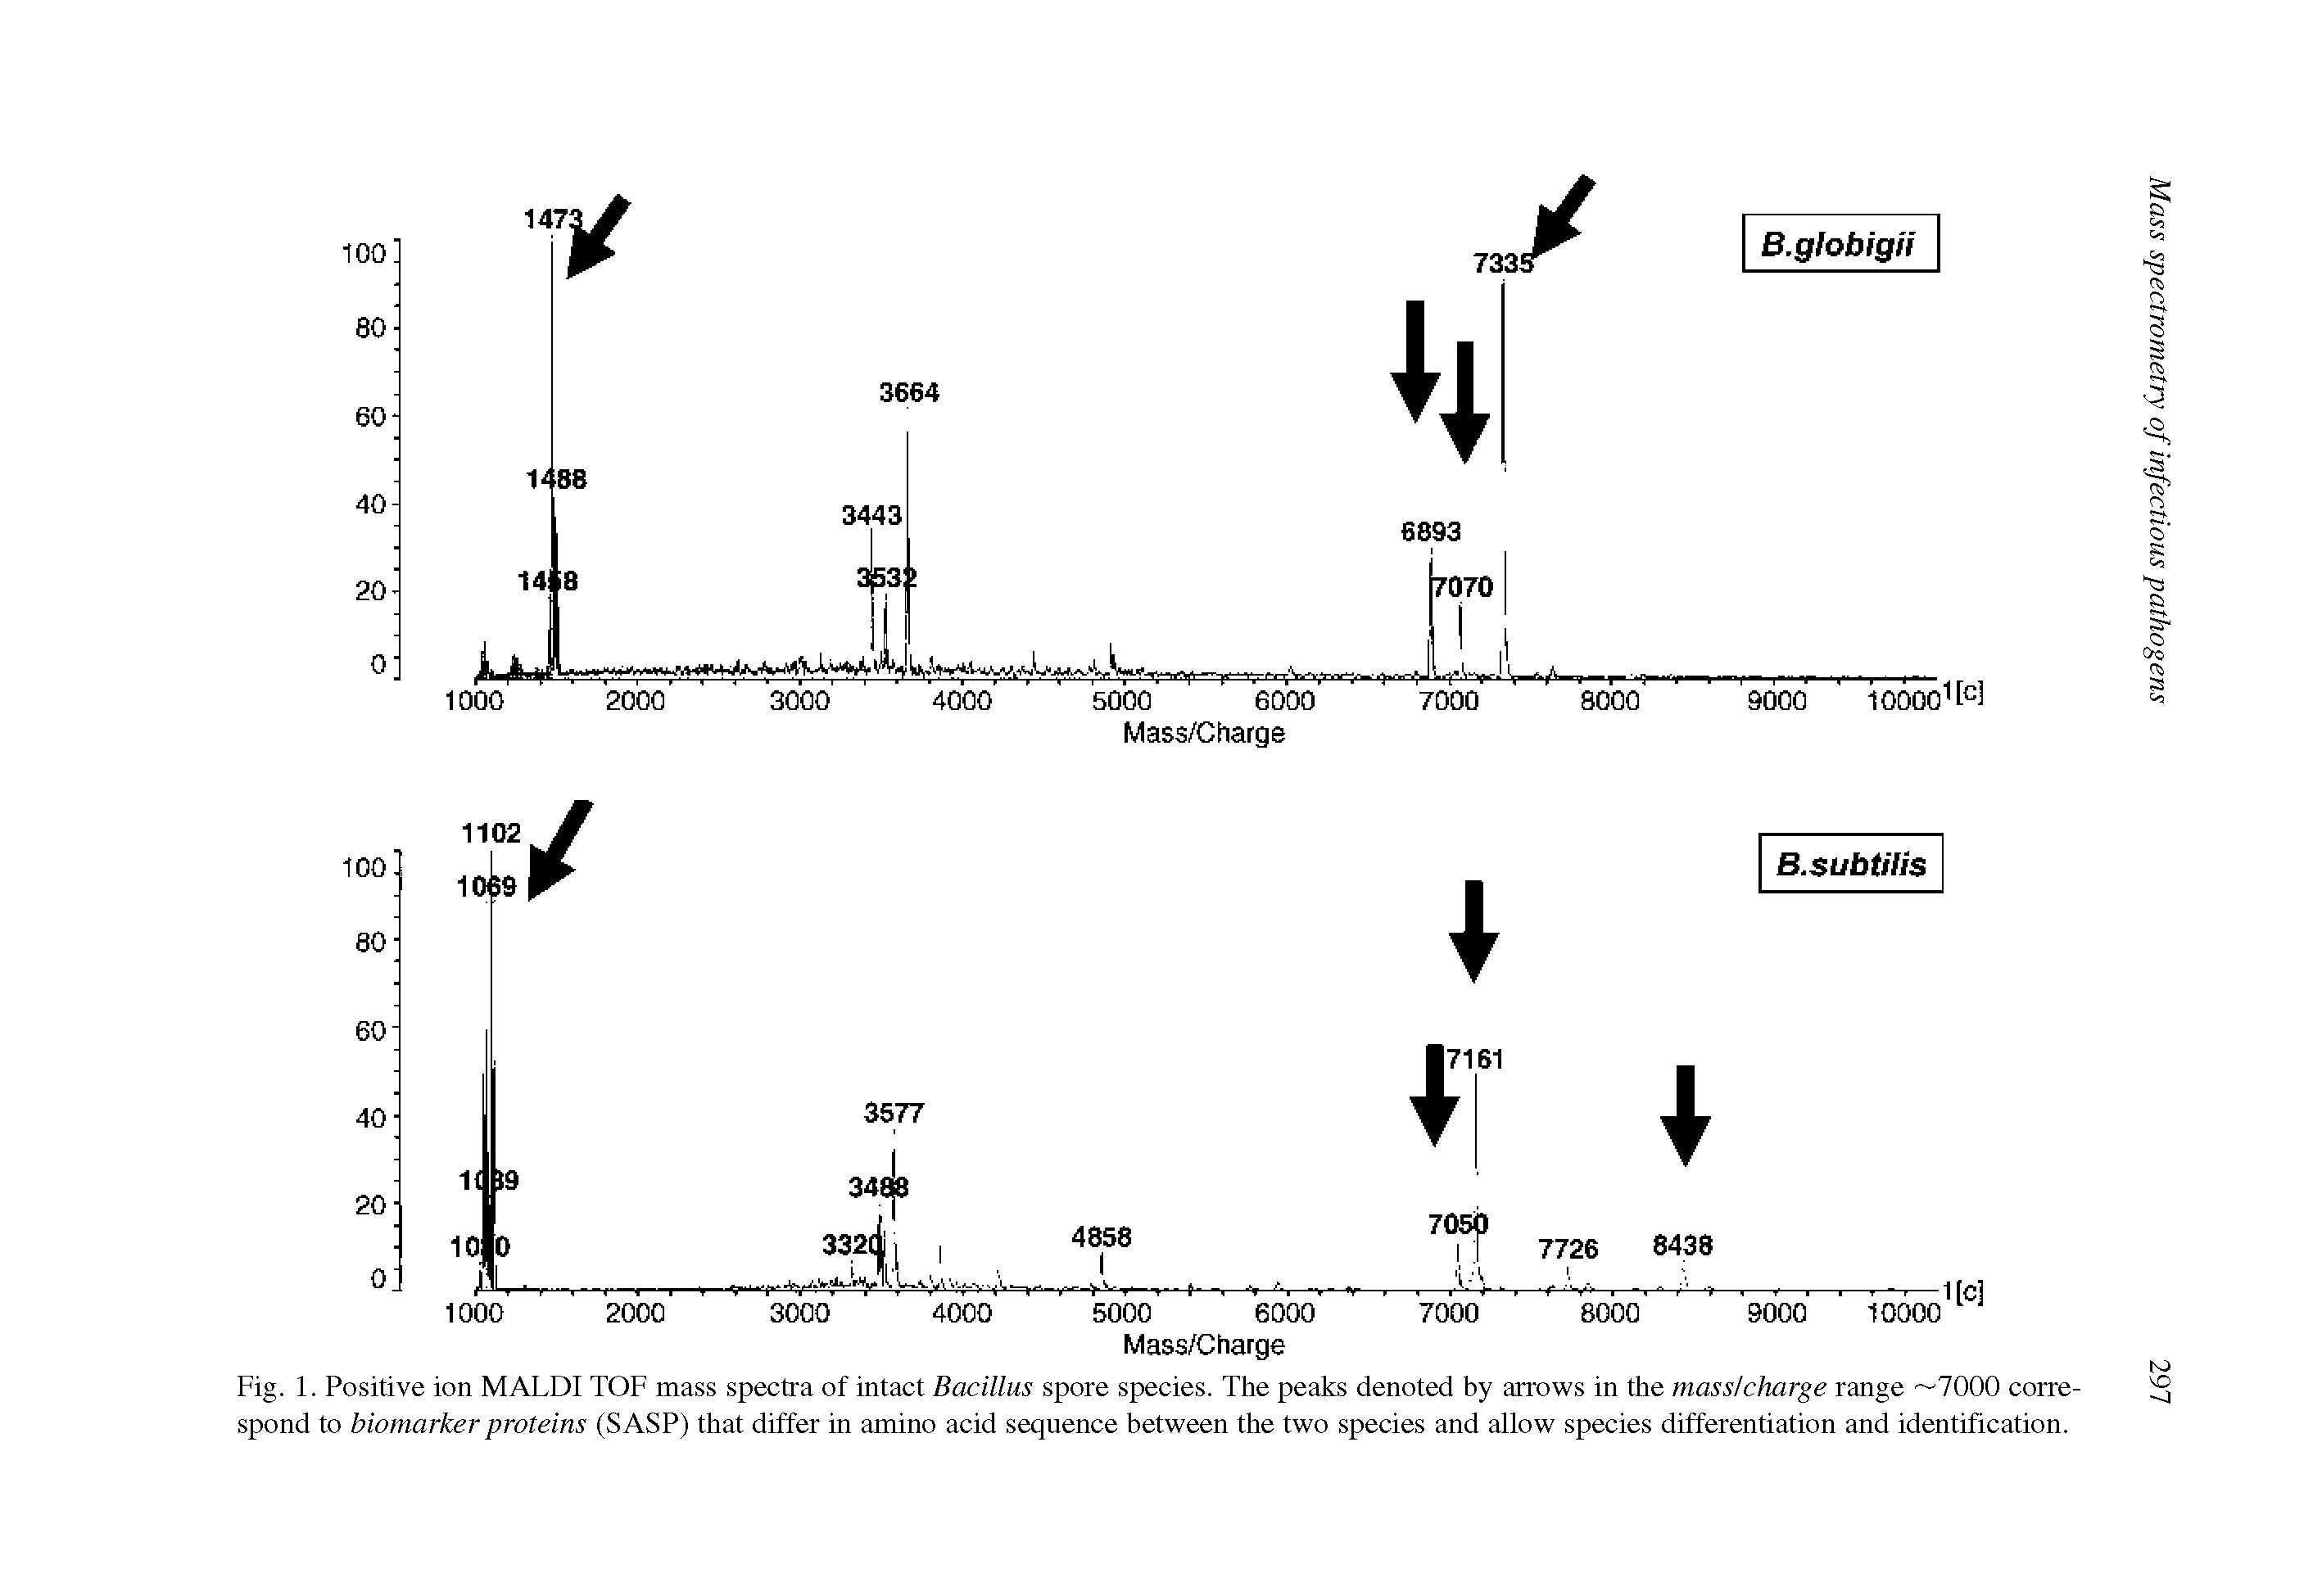 Fig. 1. Positive ion MALDI TOF mass spectra of intact Bacillus spore species. The peaks denoted by arrows in the mass/charge range 7000 correspond to biomarker proteins (SASP) that differ in amino acid sequence between the two species and allow species differentiation and identification.